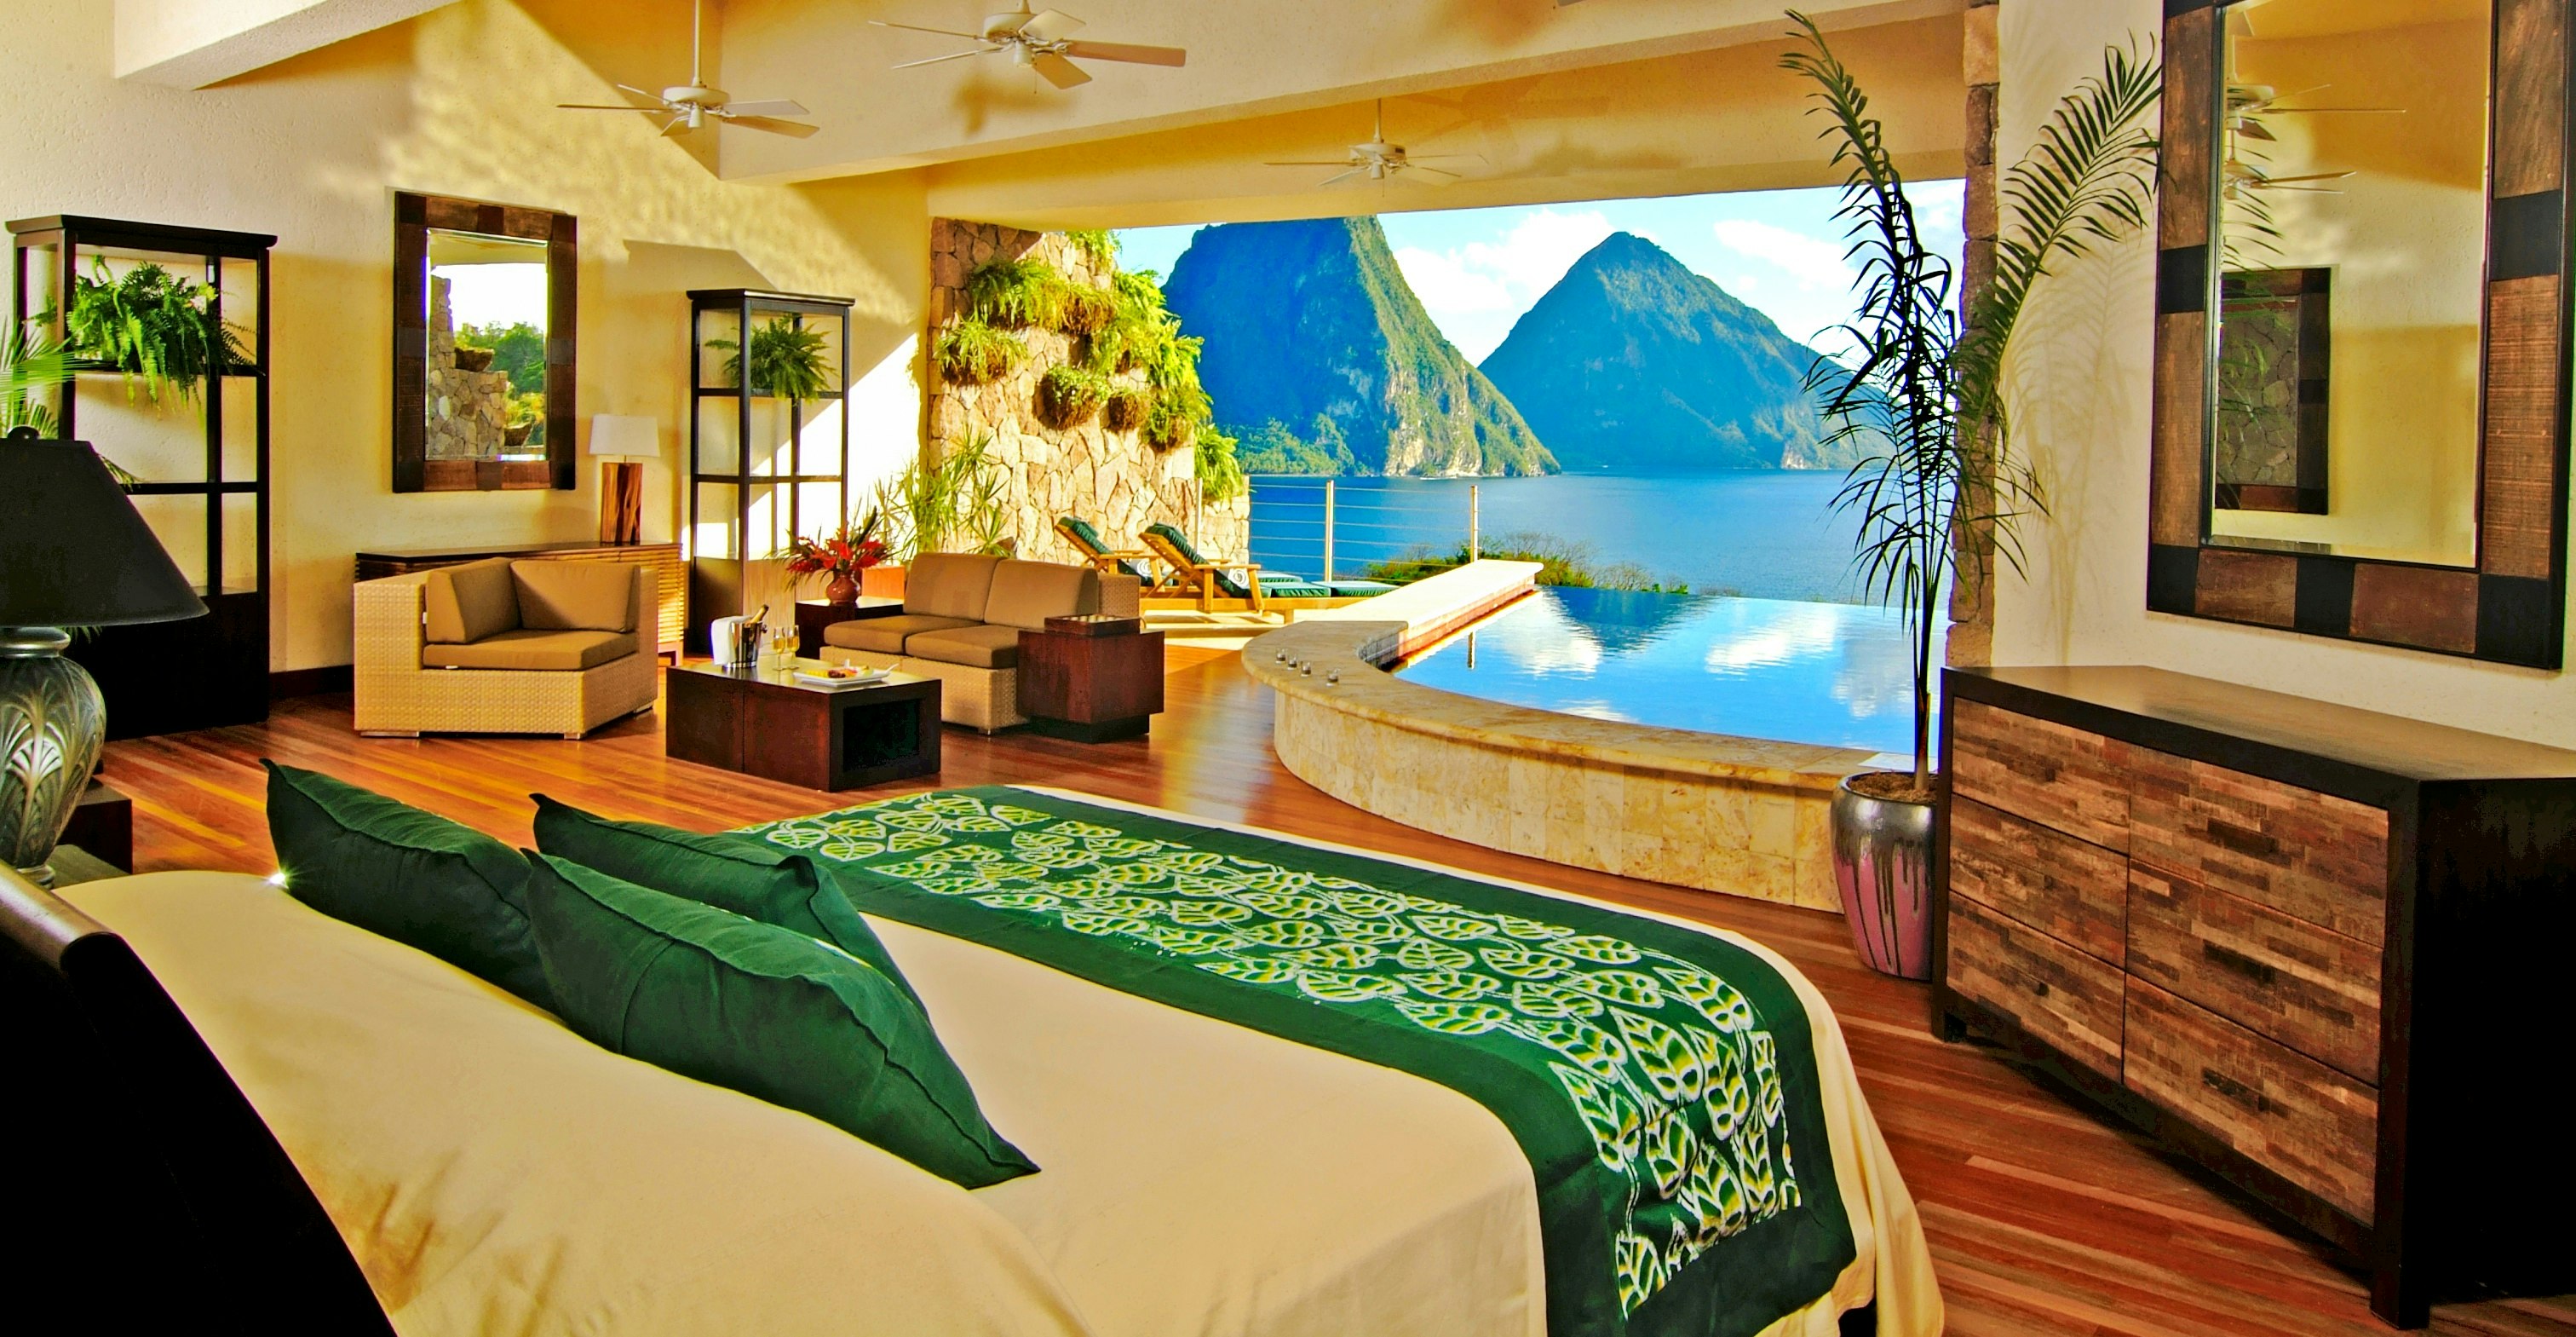 The foreground is filled with a bed with white sheets and emerald green pillows, as well as a runner with a leaf motif at the foot of the bed. It faces an expansive opening the width of the room overlooking mountains rising out of the ocean. In one corner of the room is a living room arrangement with a coffee table, love seat, and easy chair. Directly in front of the bed is a curved in-room infinity pool also overlooking the sea.